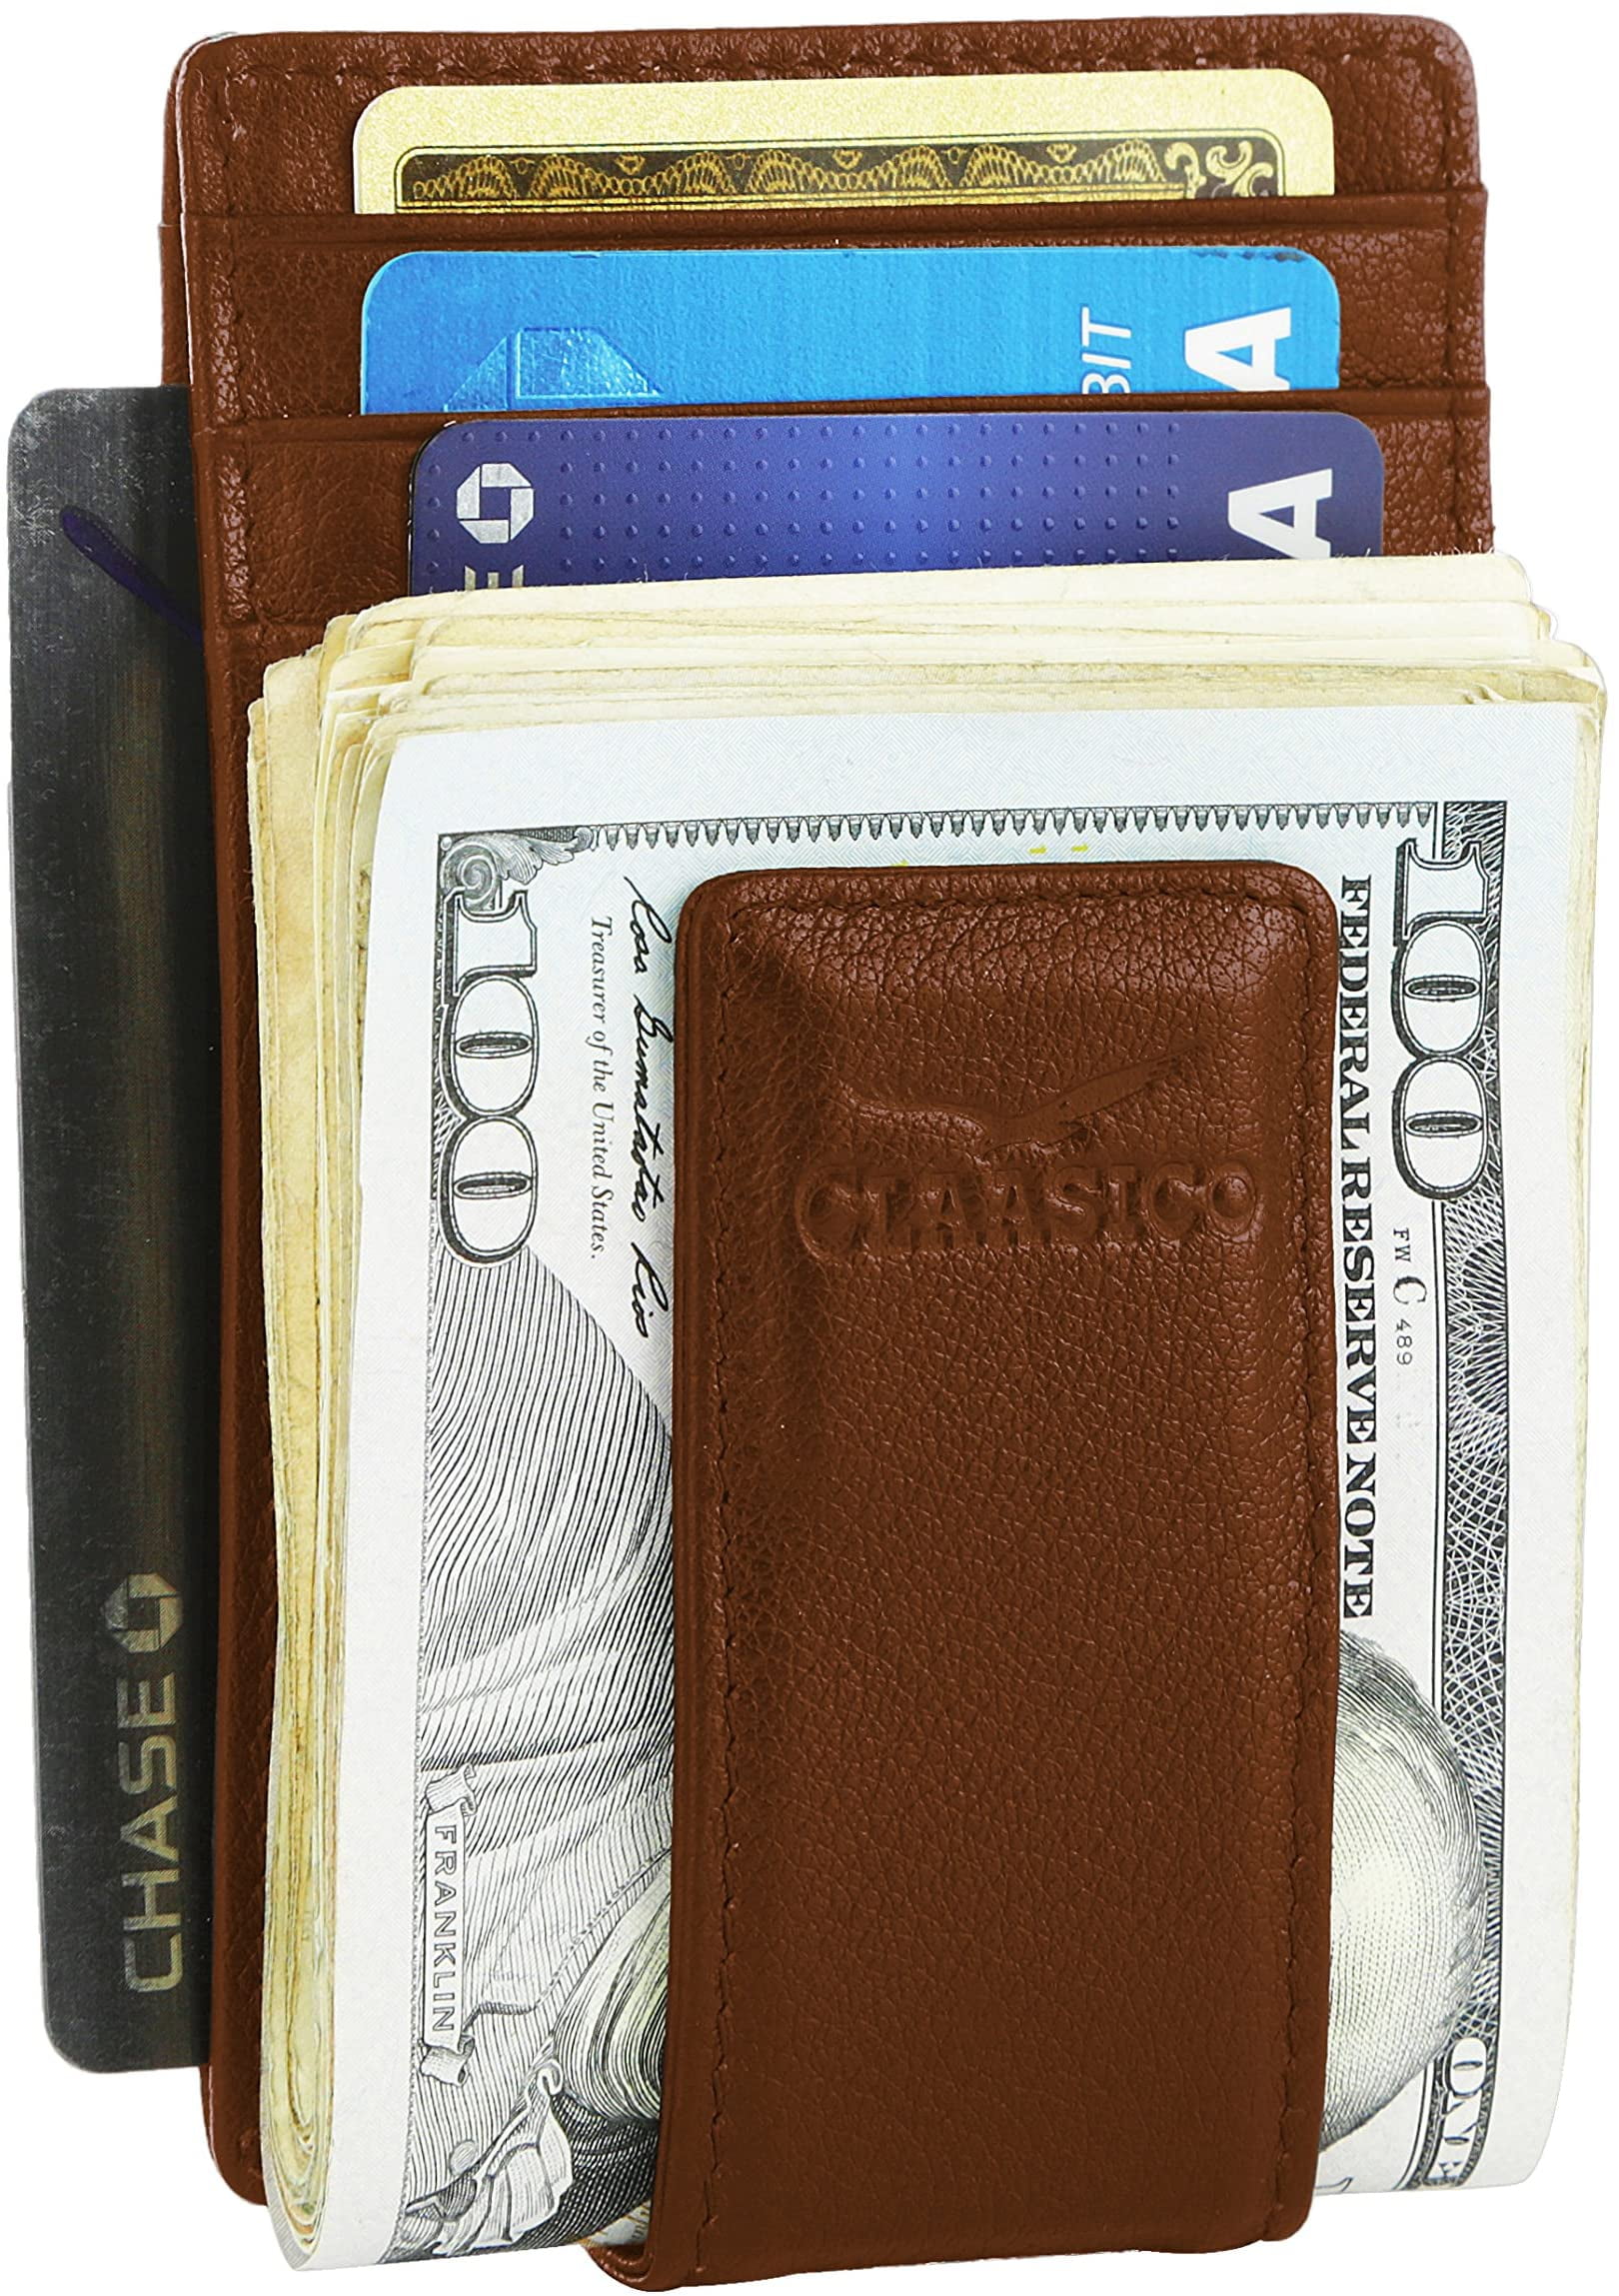 Slim Wallet For Men With Money Clip Card Holder Slot And ID Window RFID Blocking 